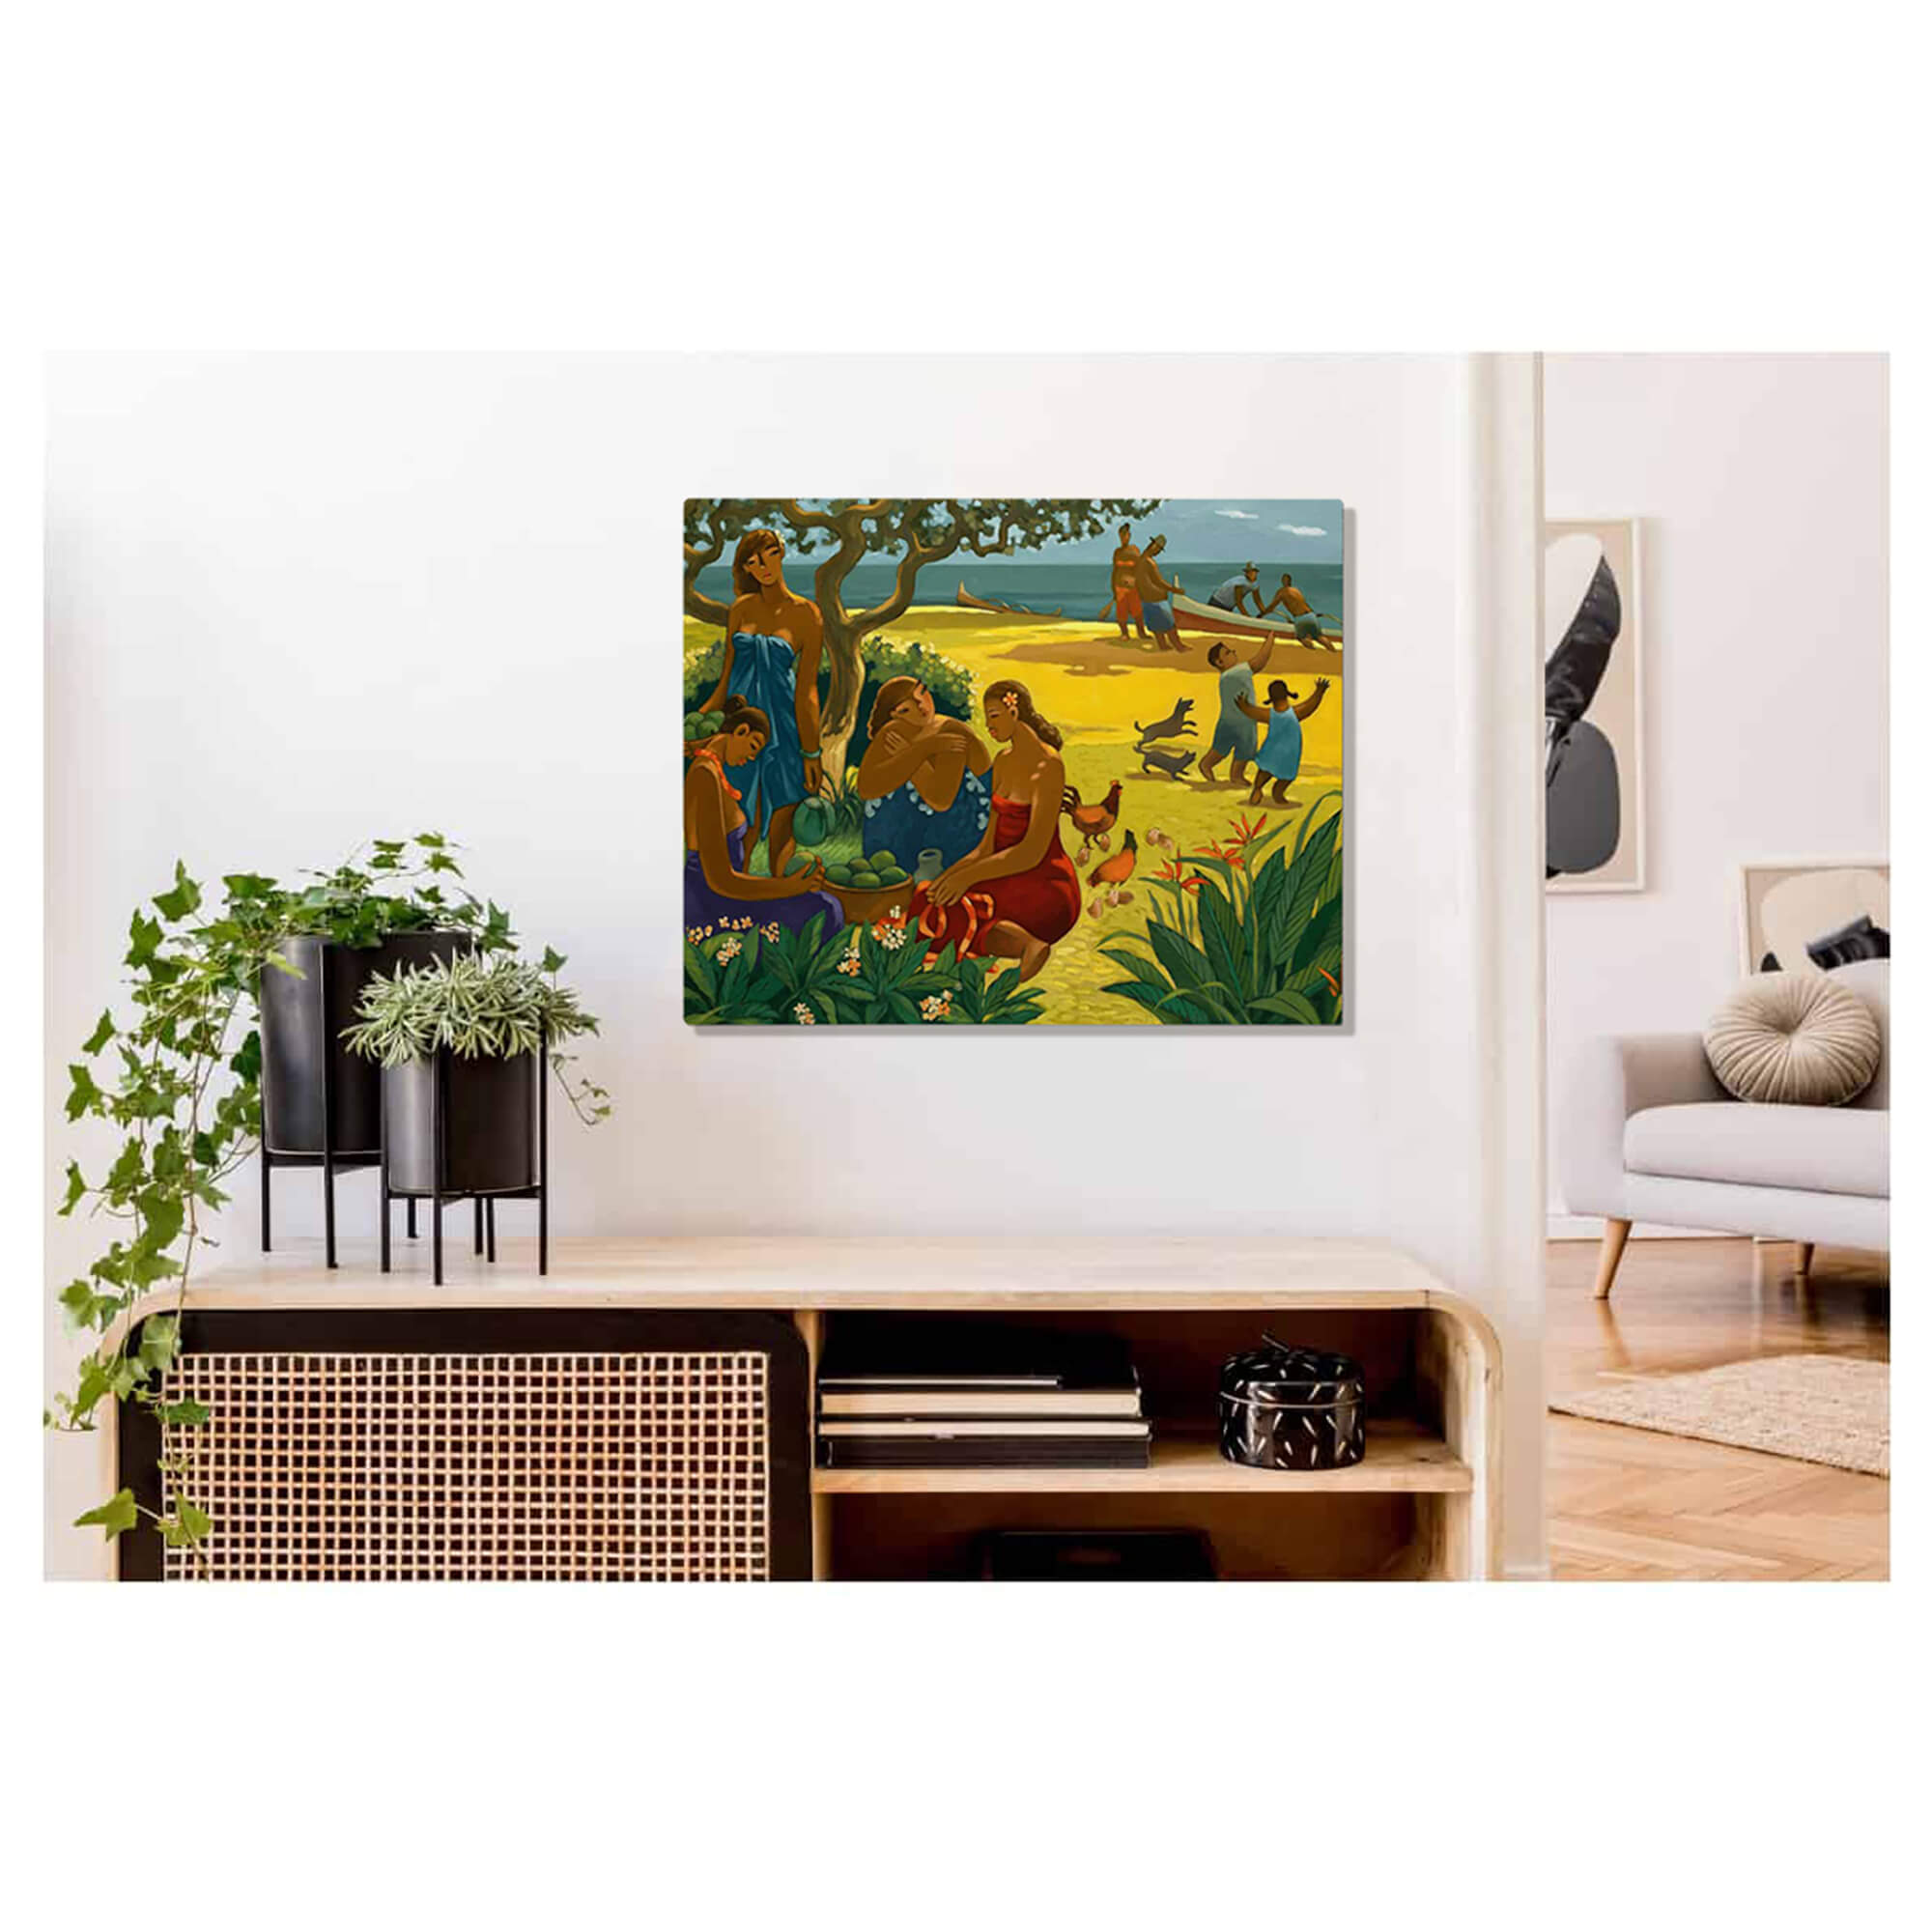 A metal art print of Hawaiian beach activities with women gathering fruit, kids playing with dogs and chickens and men pulling in an outrigger canoe by Hawaii artist Tim Nguyen